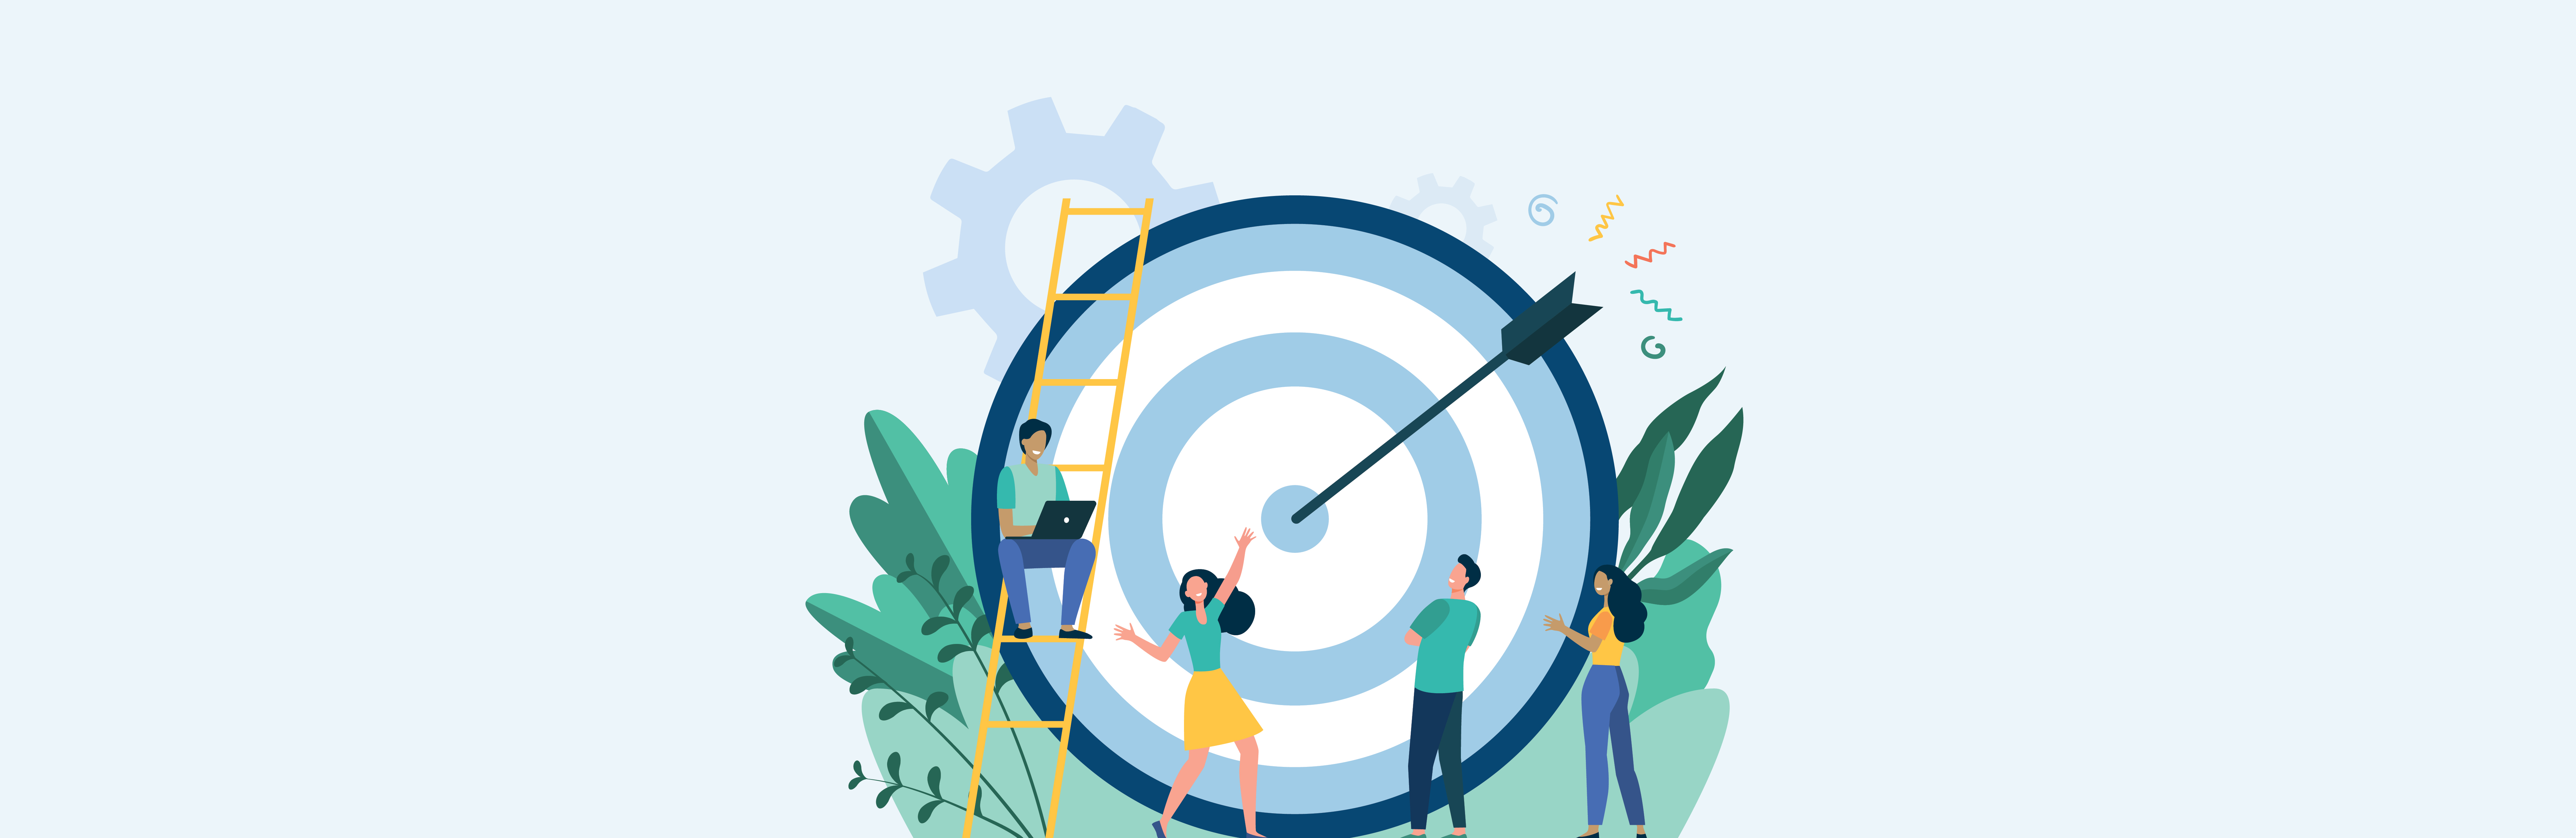 Four illustrated smiling people standing around a large target with an arrow lodged in the center